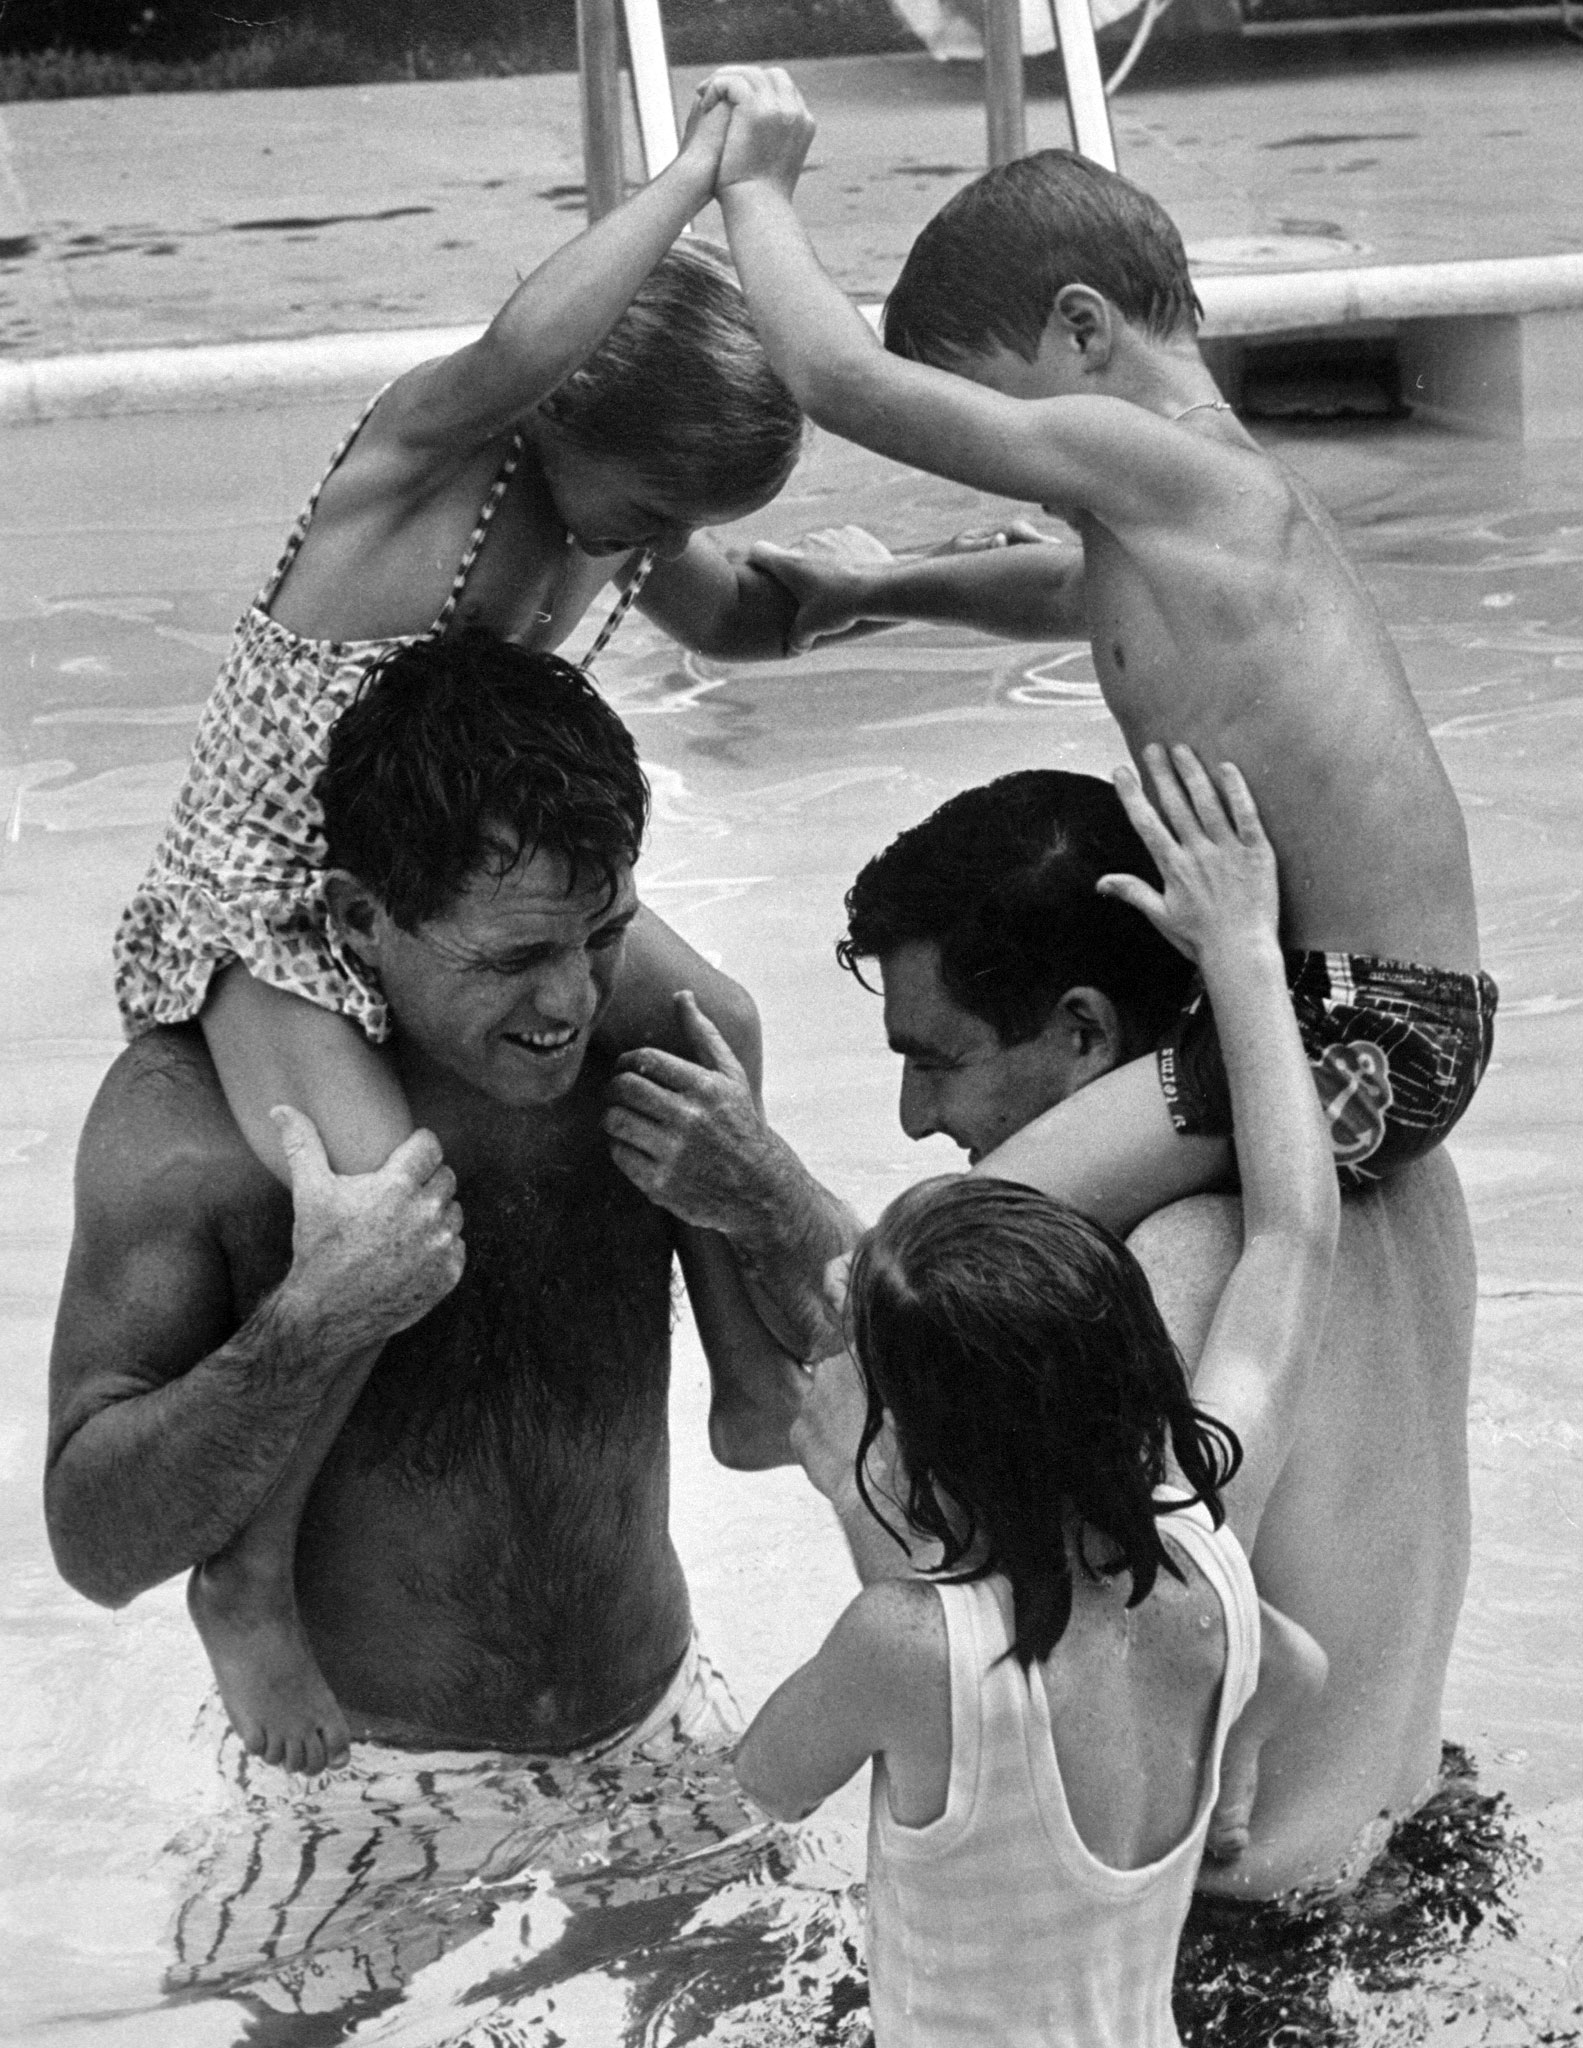 Robert Kennedy and Pierre Salinger joust with kids in Kennedy's pool, 1964.